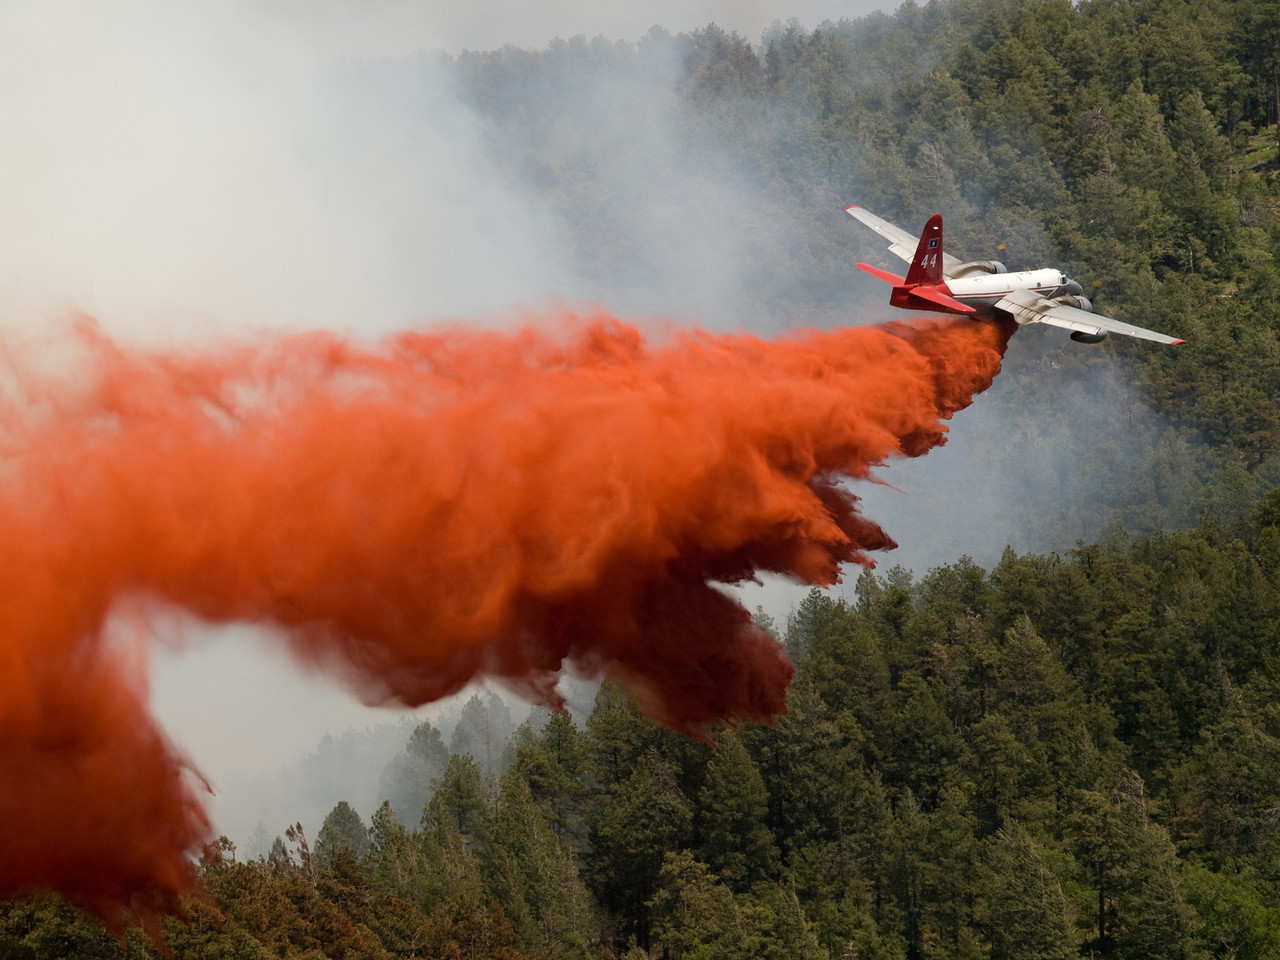 A large airtanker aircraft dropping red fire retardand in the path of a forest fire.